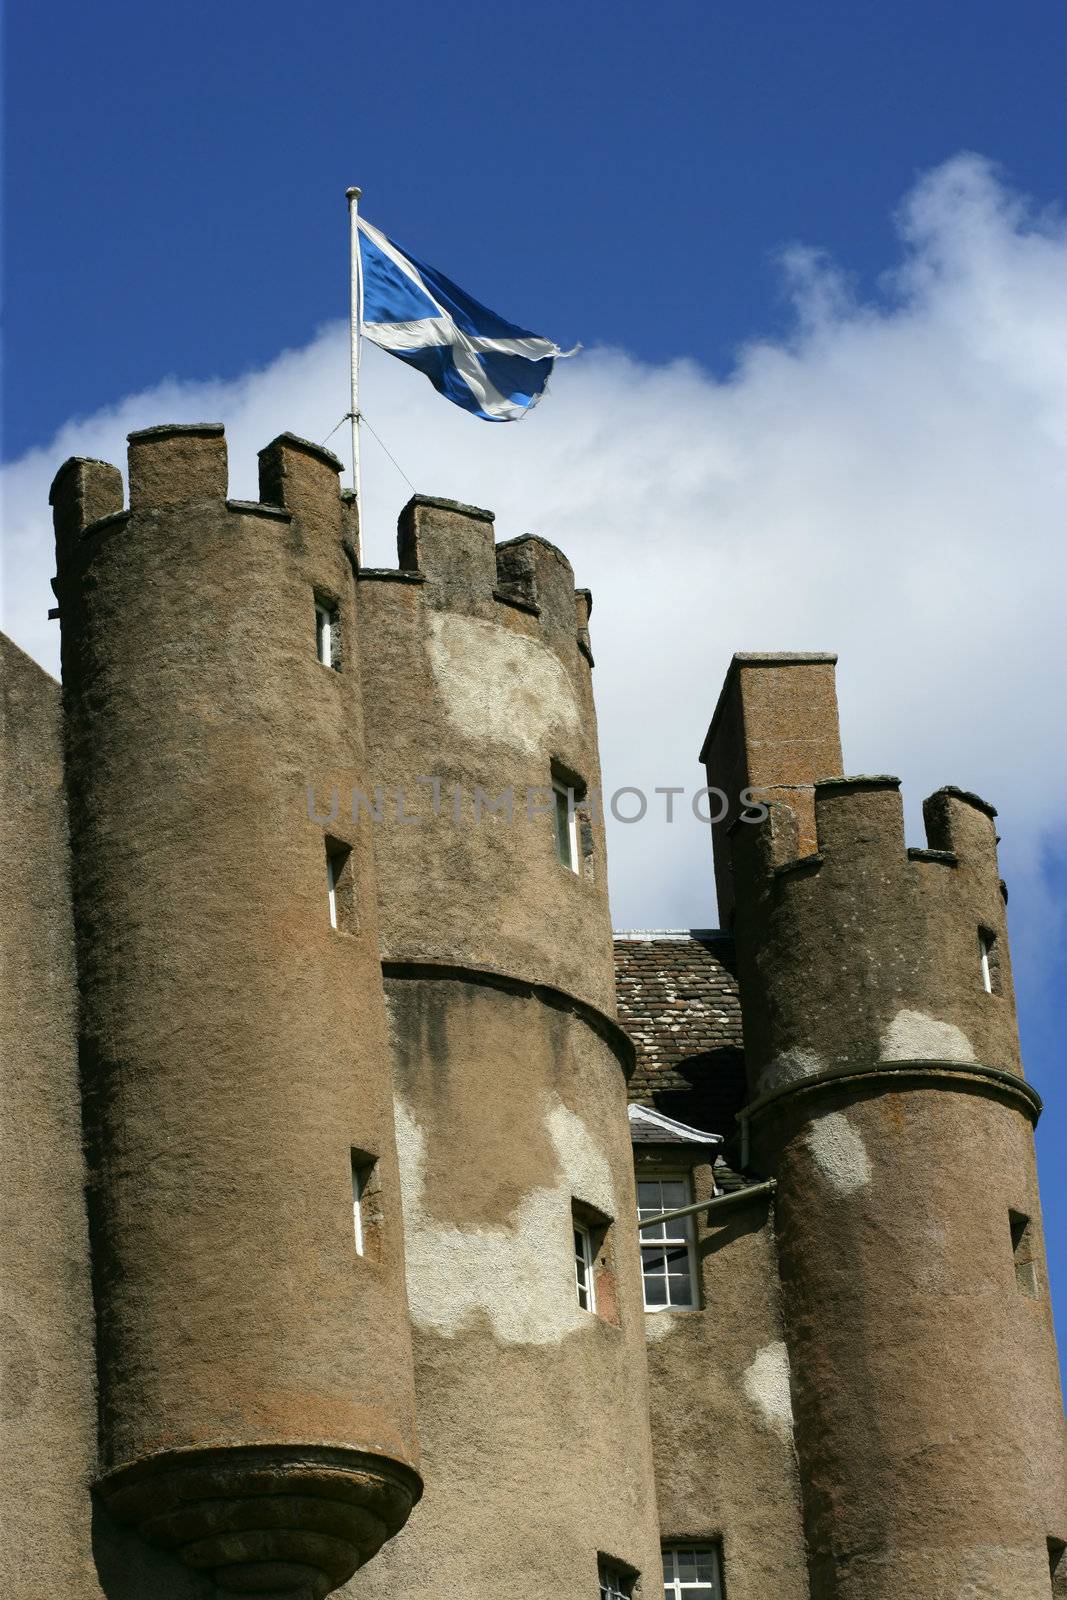 Turrets of a castle in Scotland with Scottish flag blowing in the wind.
